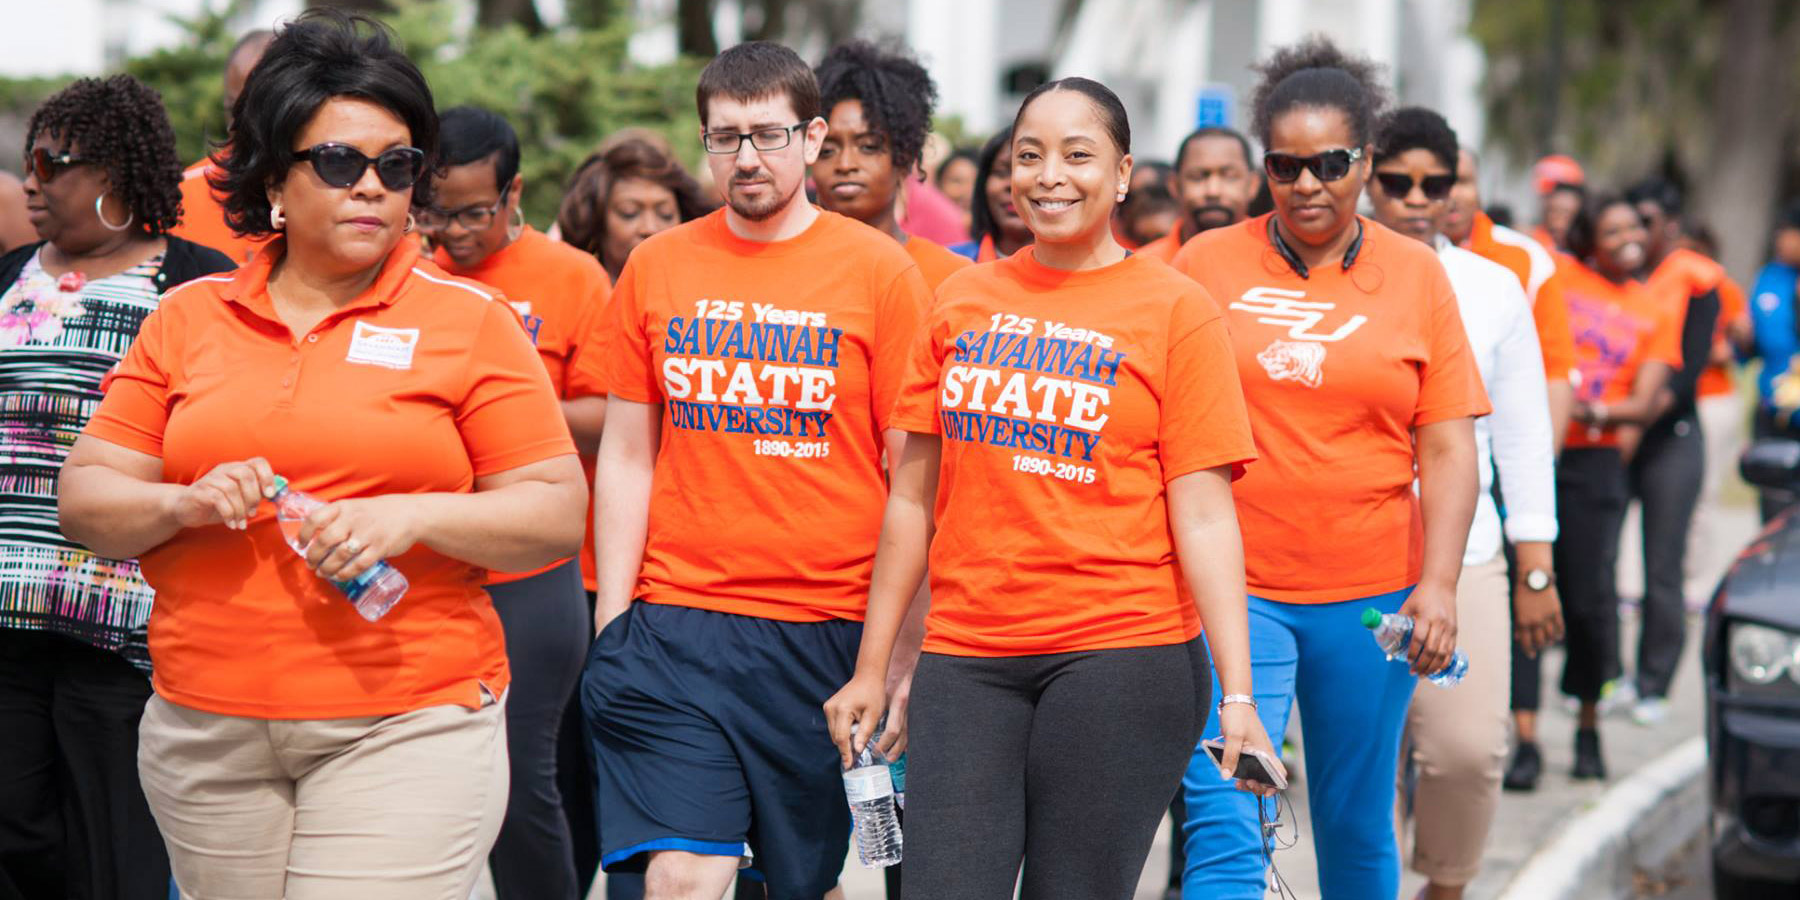 Savannah State University employees participating in a campus fitness walk.